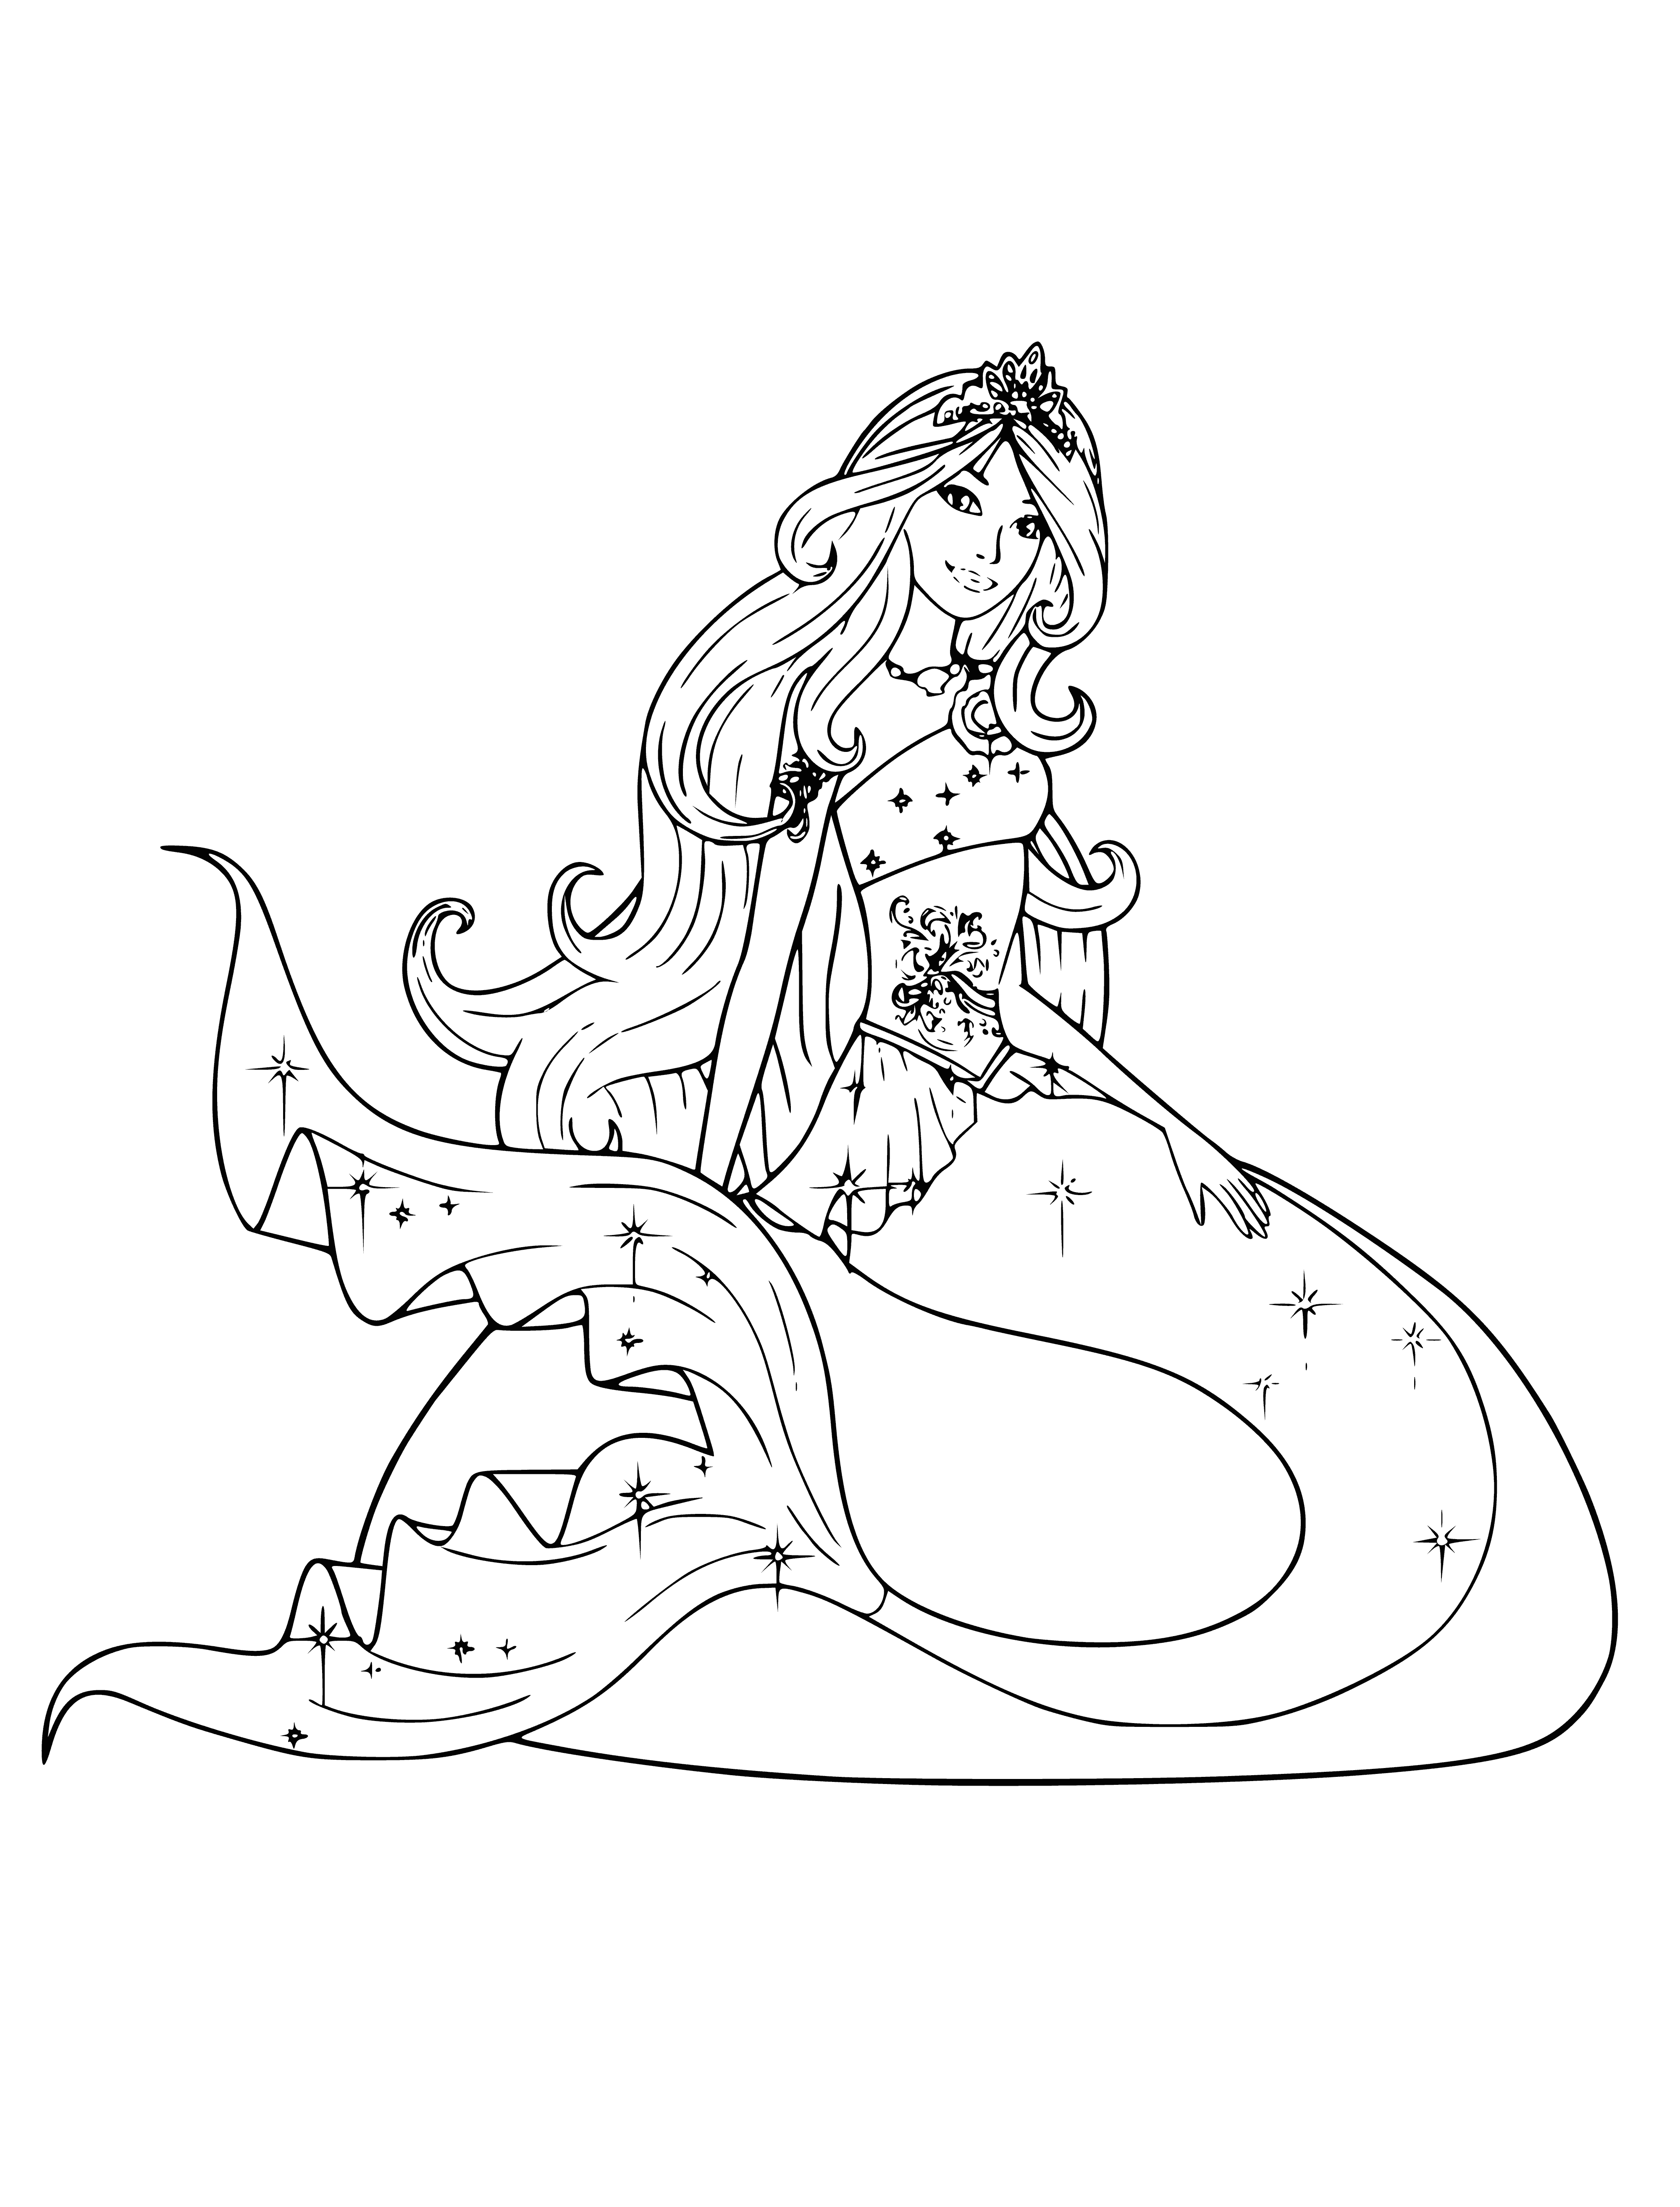 coloring page: Beautiful Barbie mermaid princess with a pink seashell bra and a purple starfish on her head, sitting on a rock in the ocean with green seaweed and pink coral.